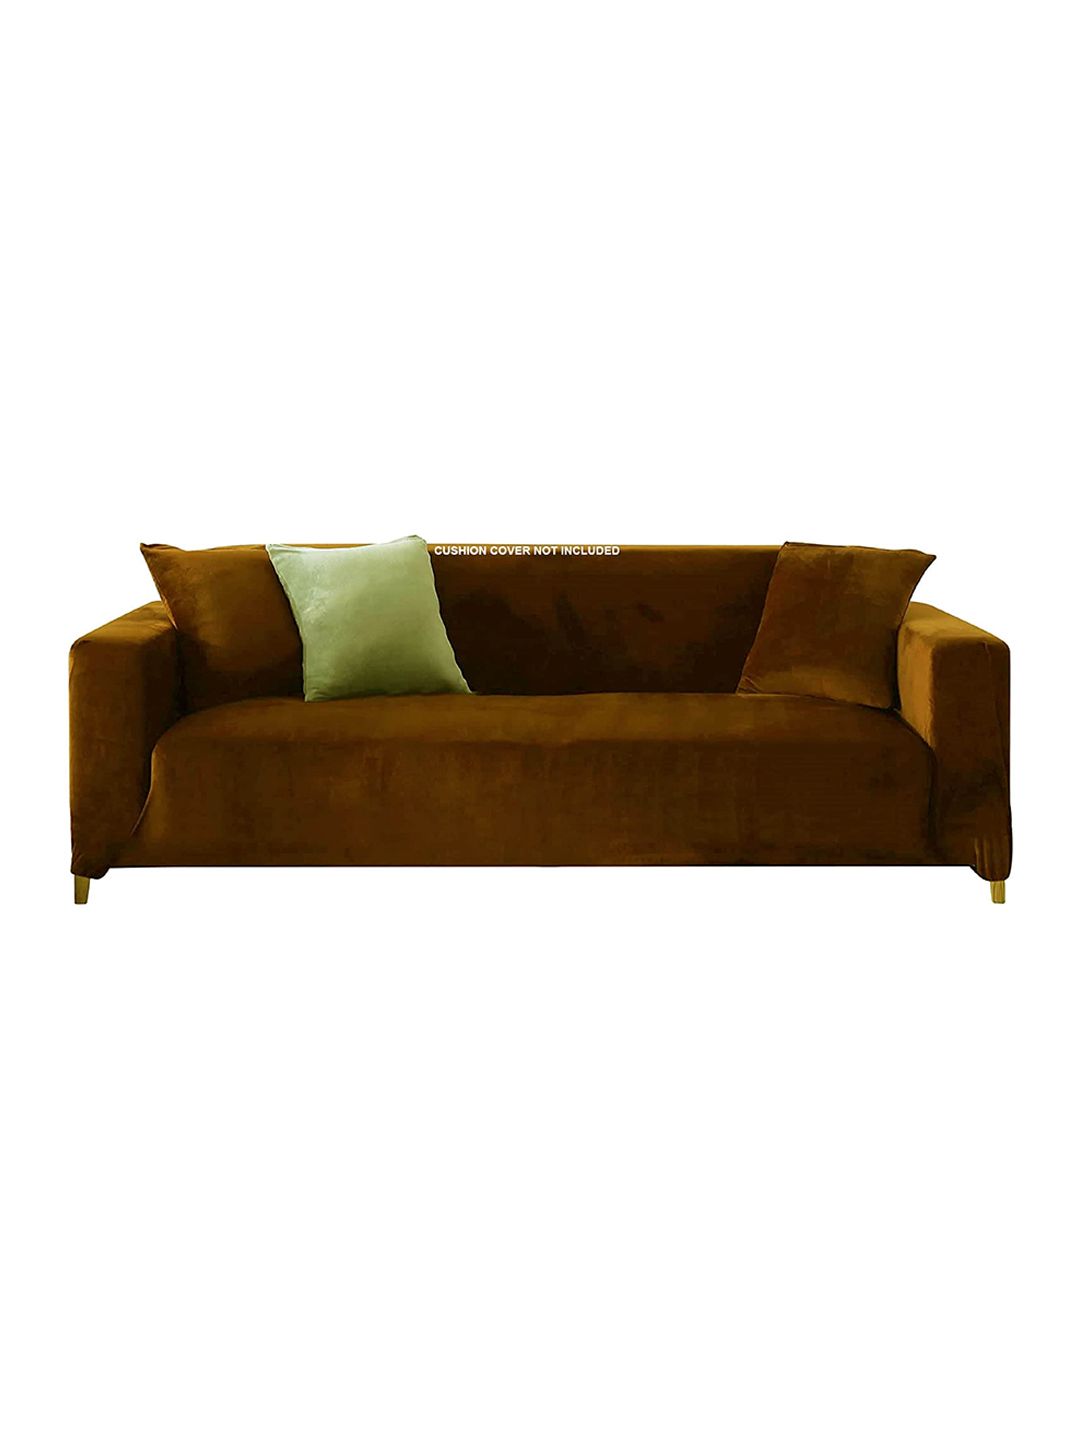 HOUSE OF QUIRK Brown Solid Sofa Cover Price in India